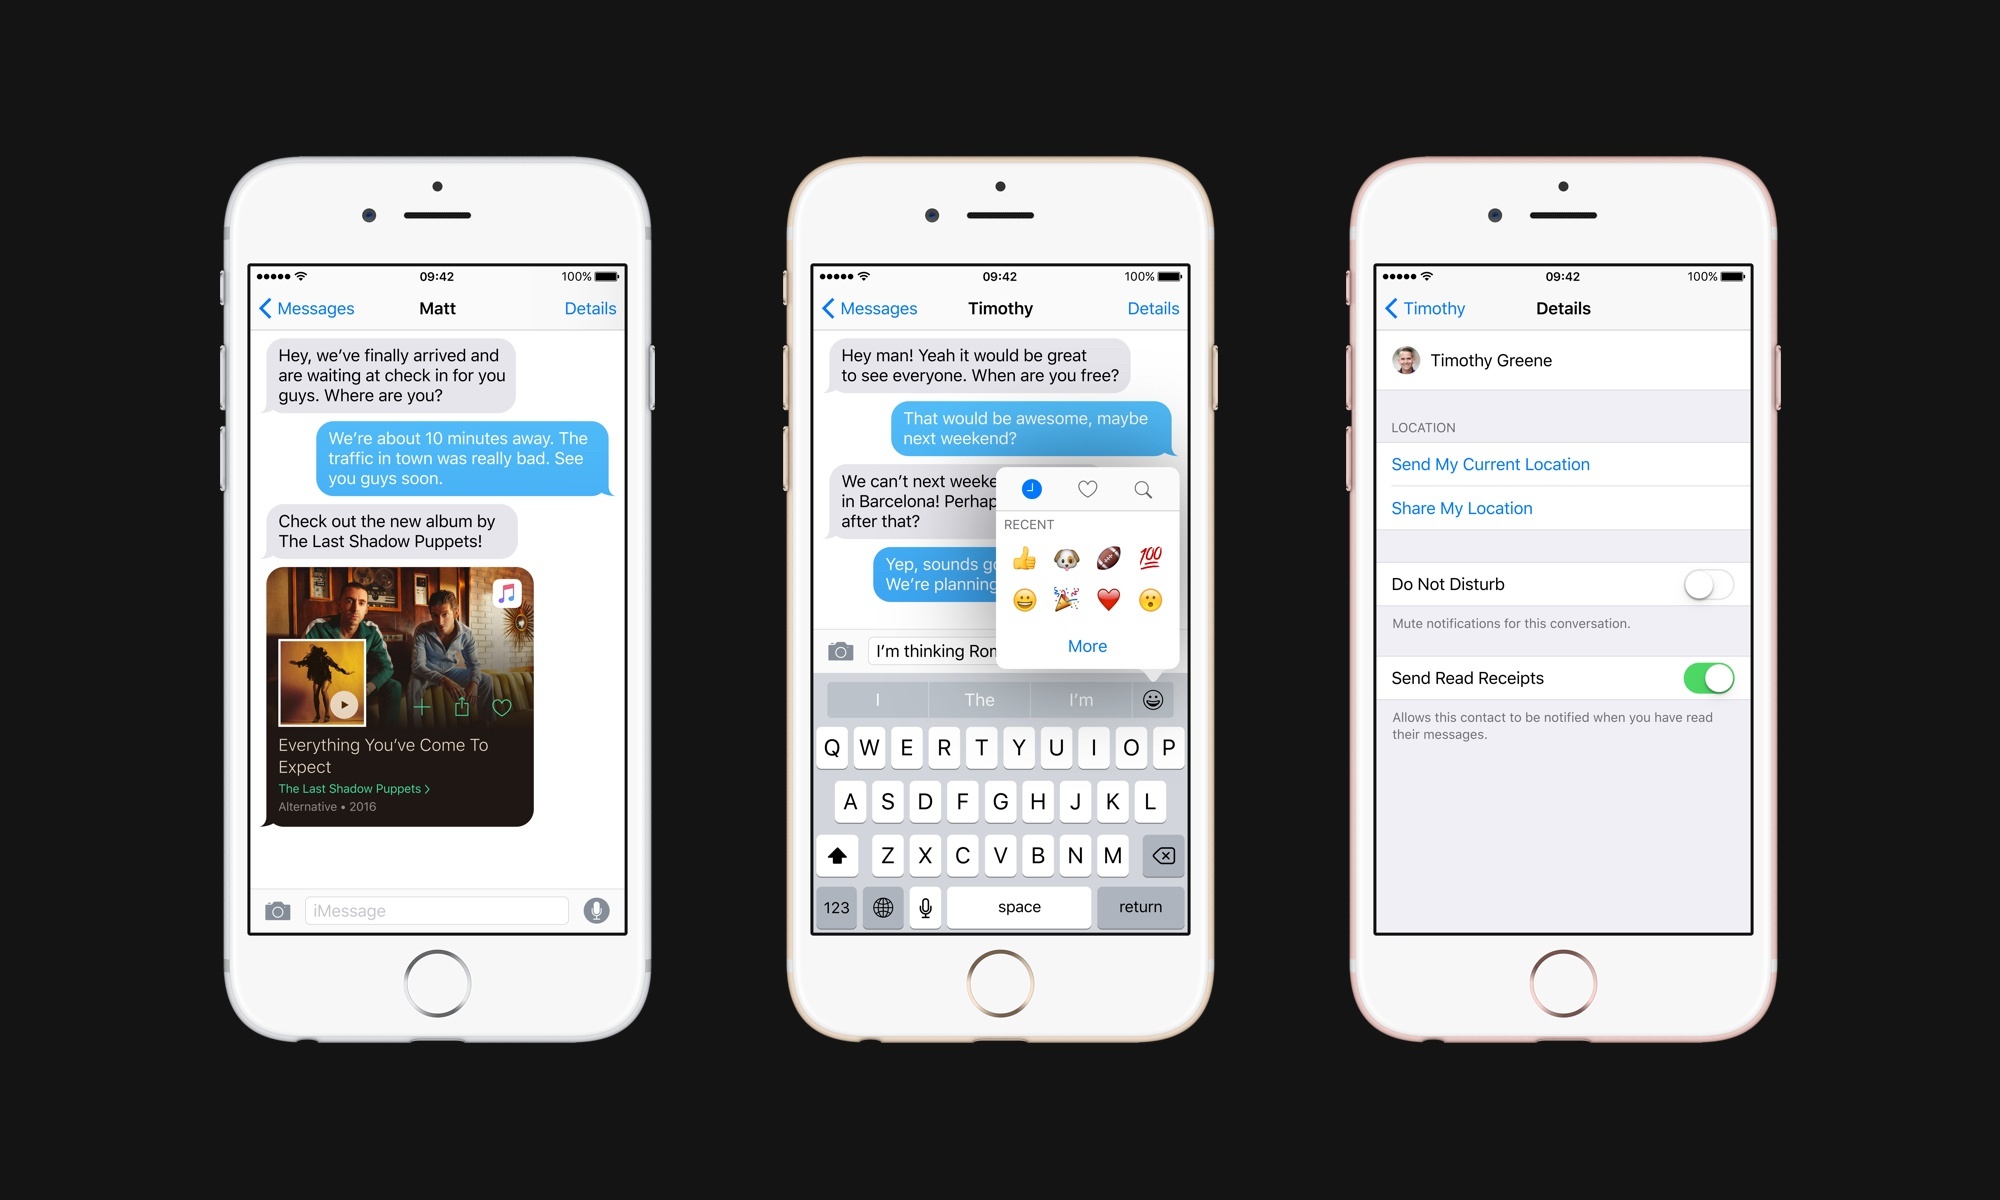 Rich previews, faster emoji input, and granular read receipts in Messages.